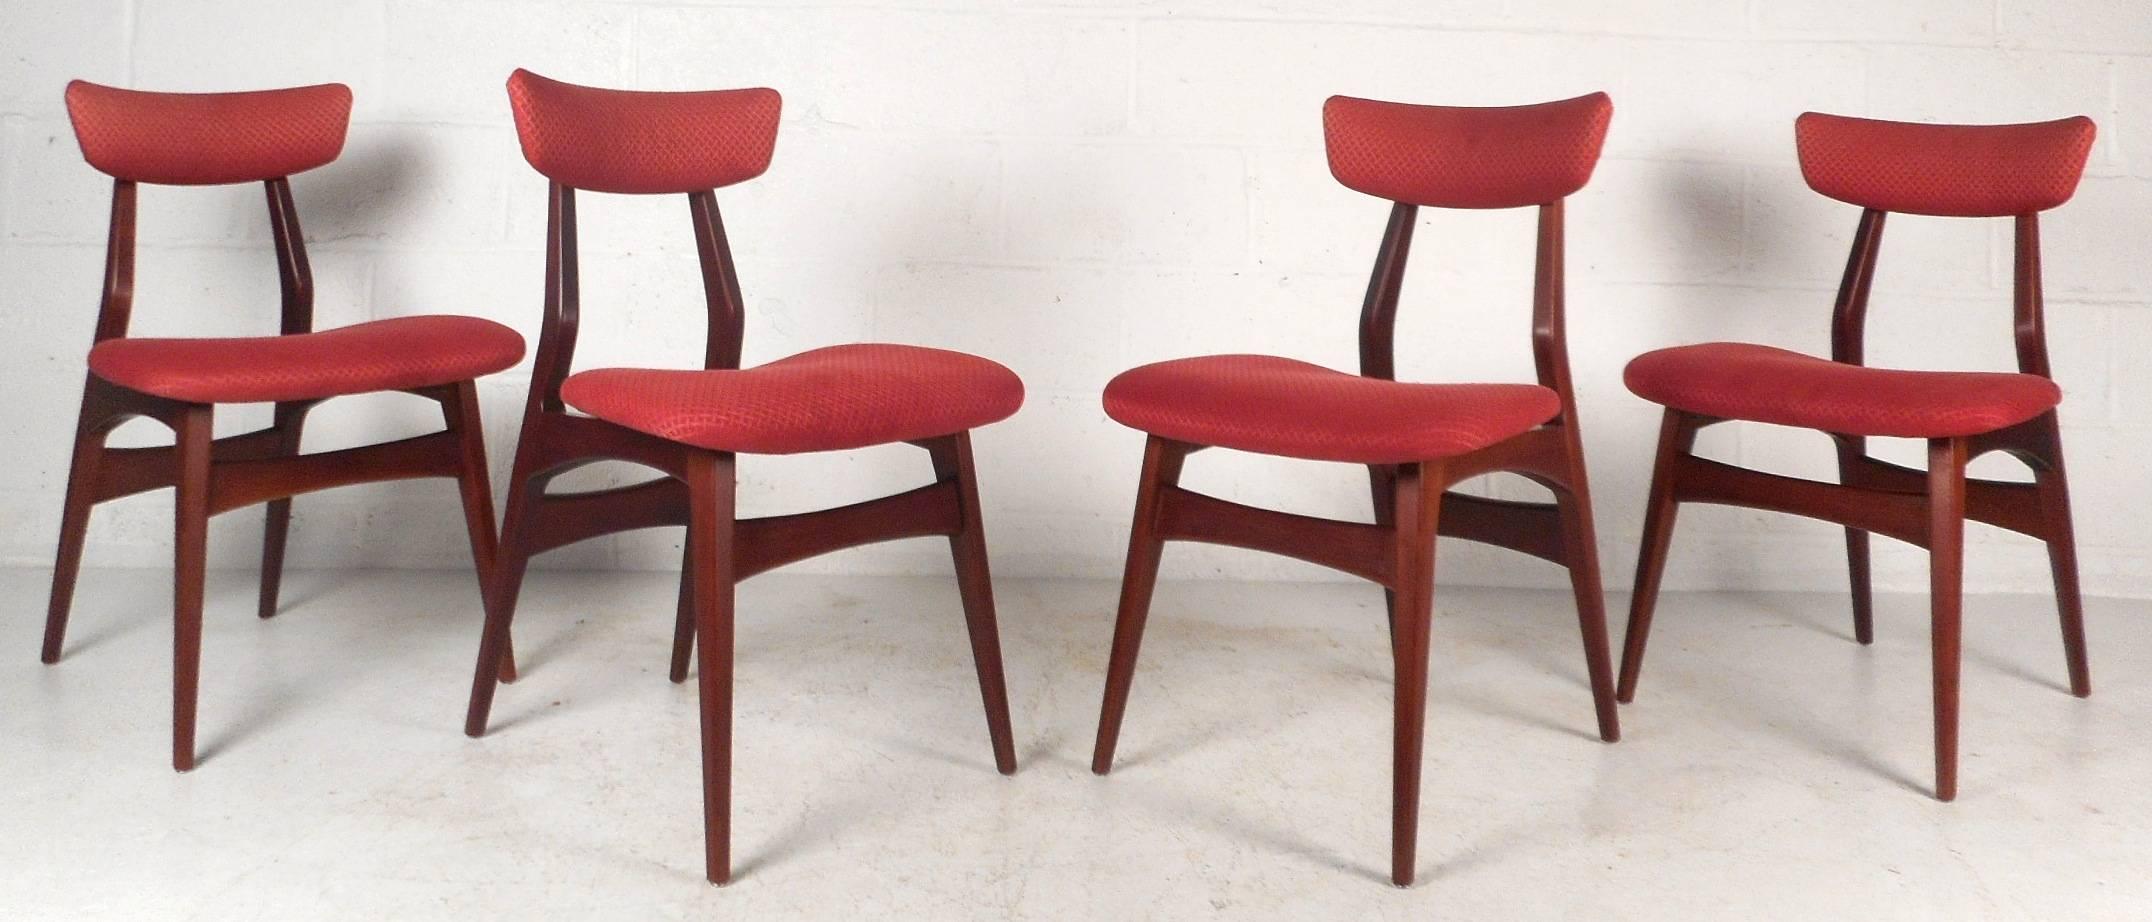 This exquisite set of four vintage modern dining chairs feature an unusual sculpted walnut frame with angled and tapered legs. Sleek design with shapely floating back rests and elegant plush red upholstery. Quality craftsmanship by George Nelson has